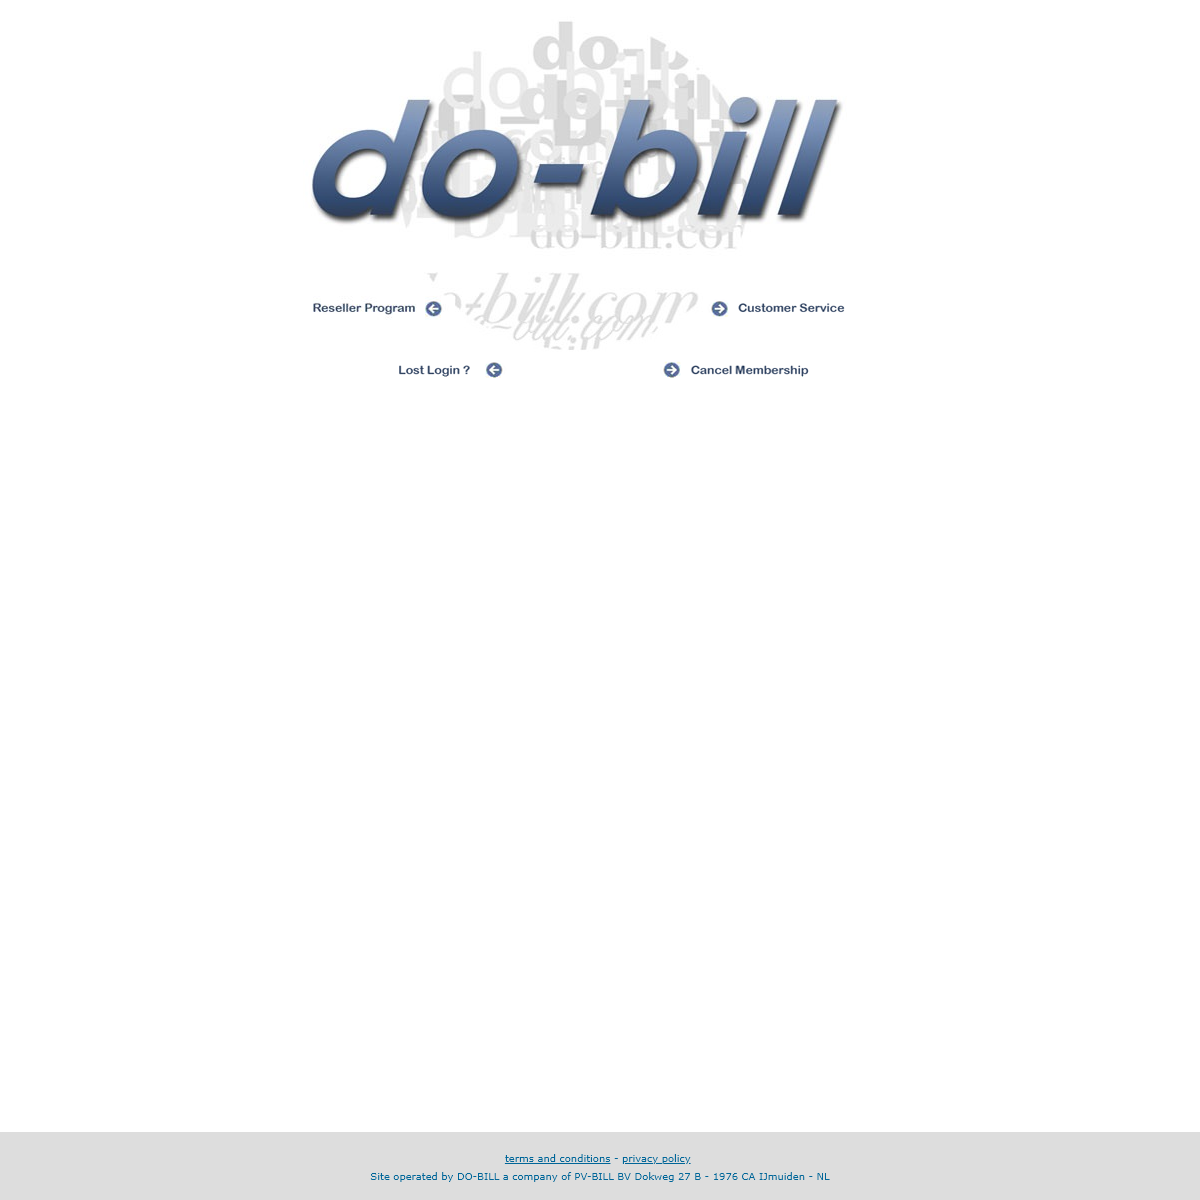 A complete backup of www.do-bill.com